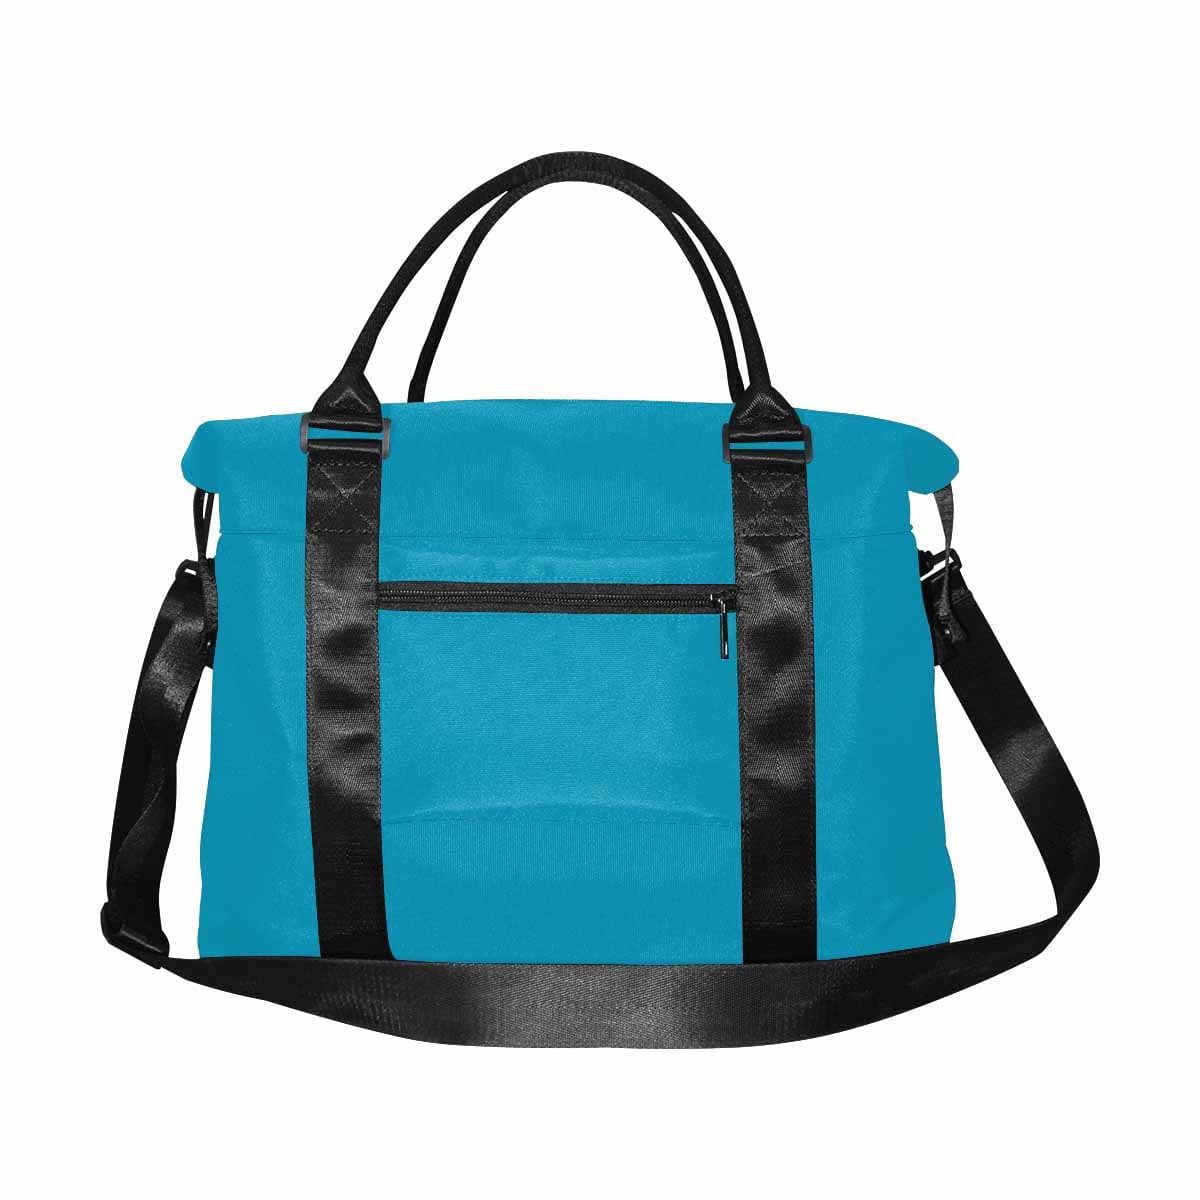 Blue Green Duffel Bag Large Travel Carry On - Bags | Duffel Bags